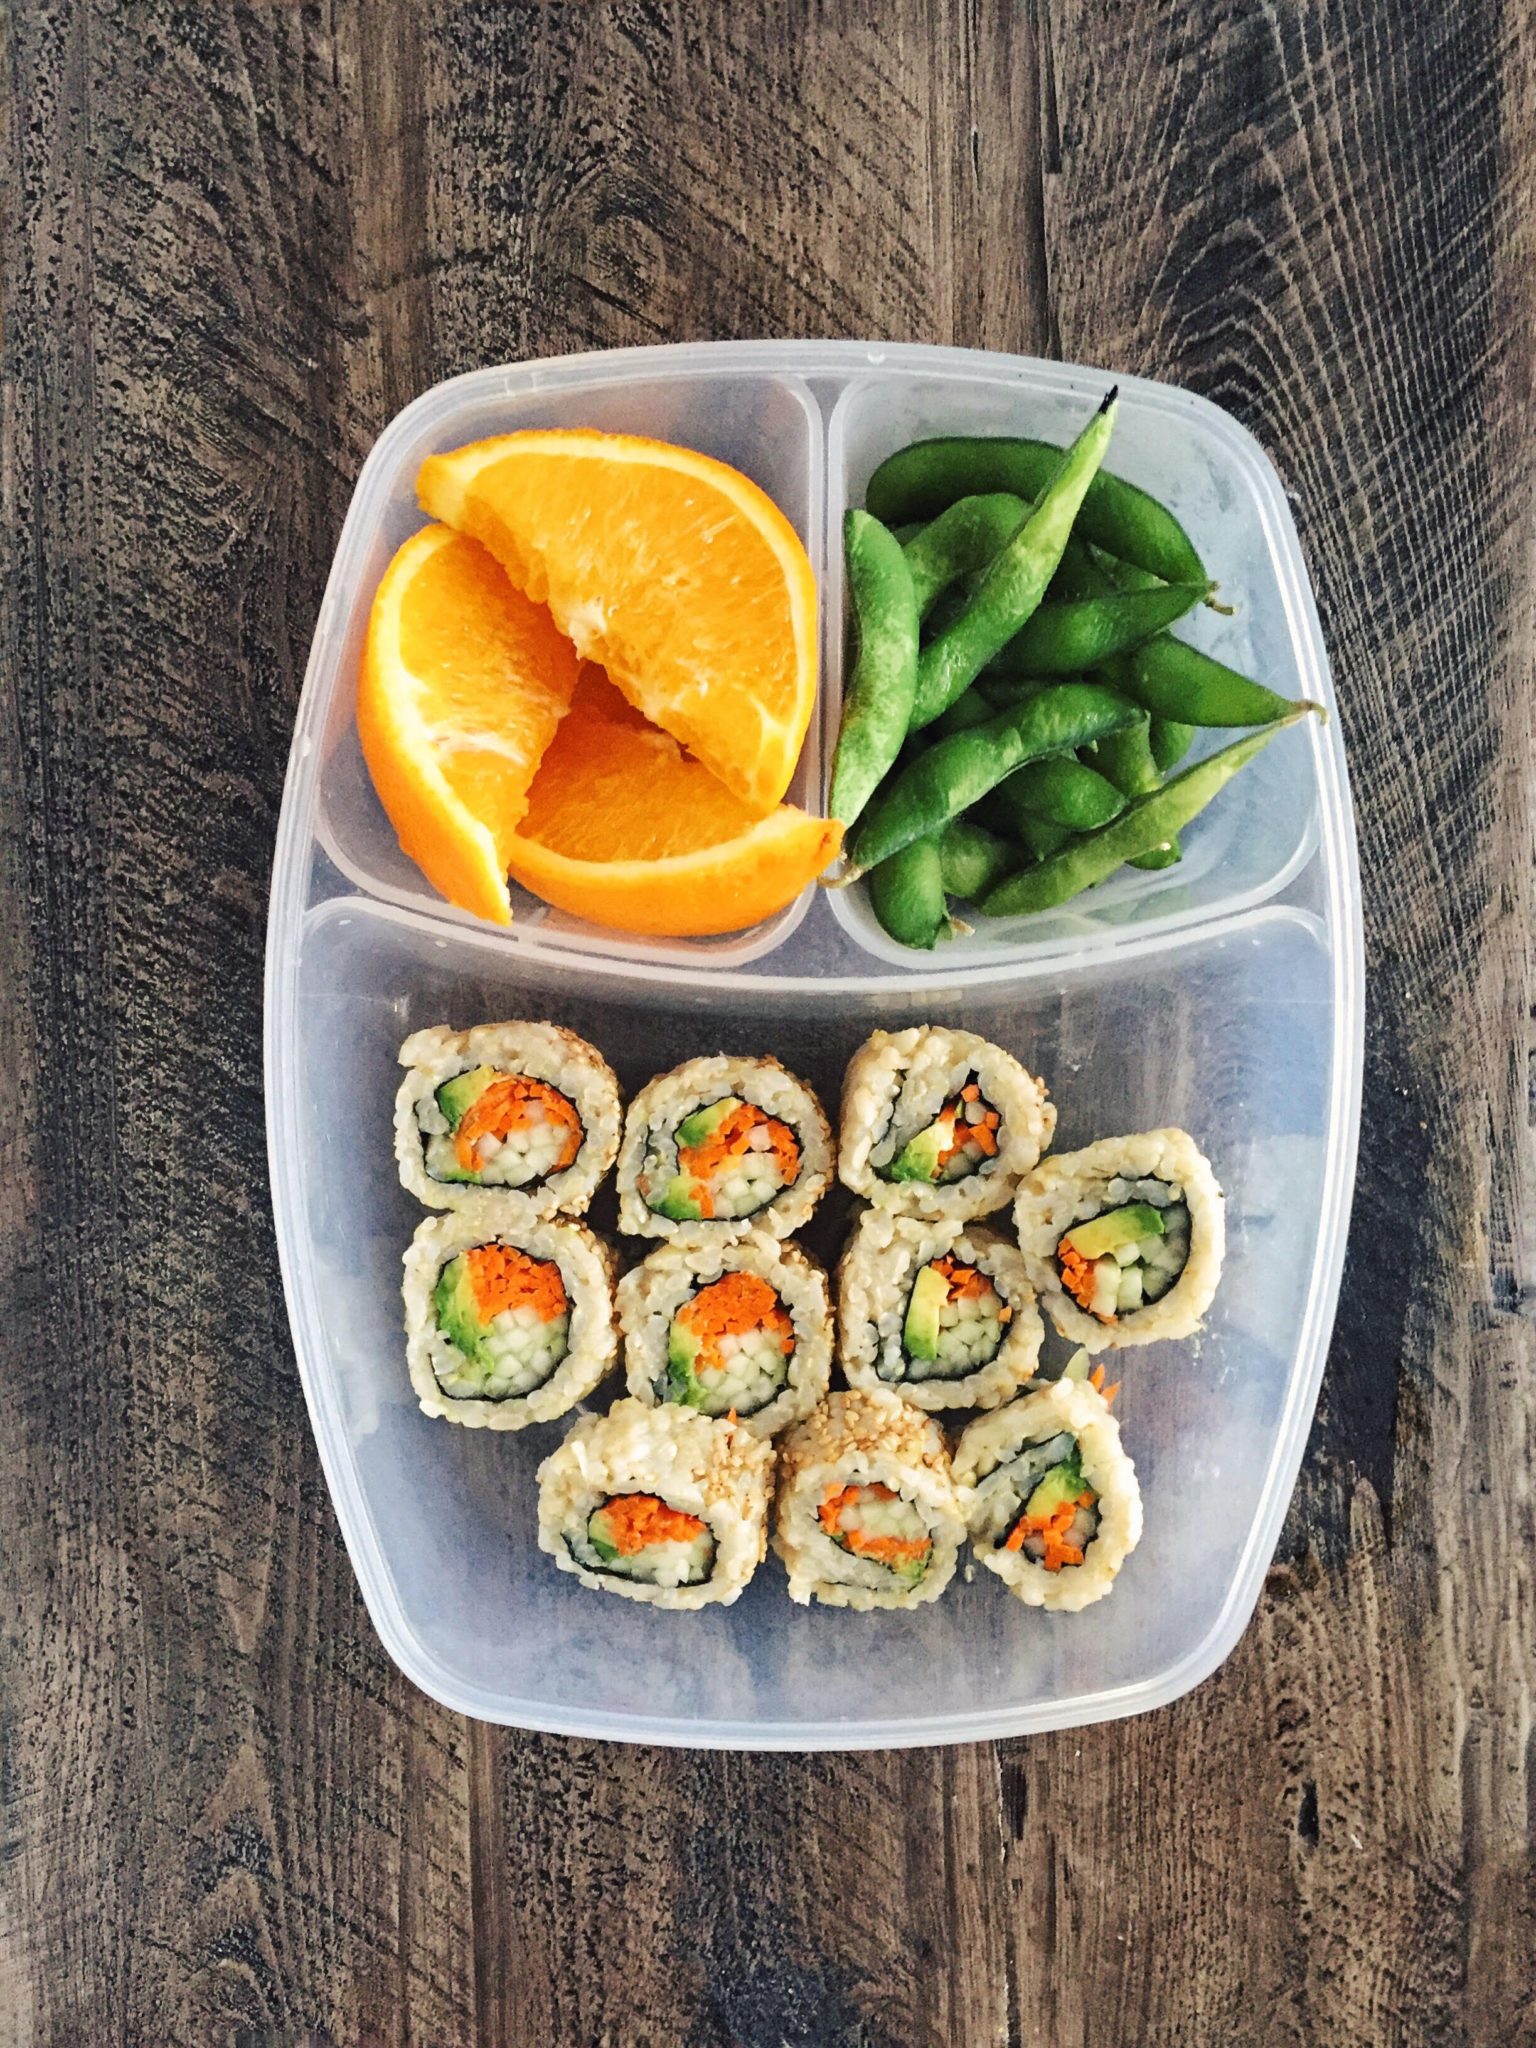 the lunchbox series - dietitian-approved packed lunches that will make you look forward to your lunch break! // cait's plate